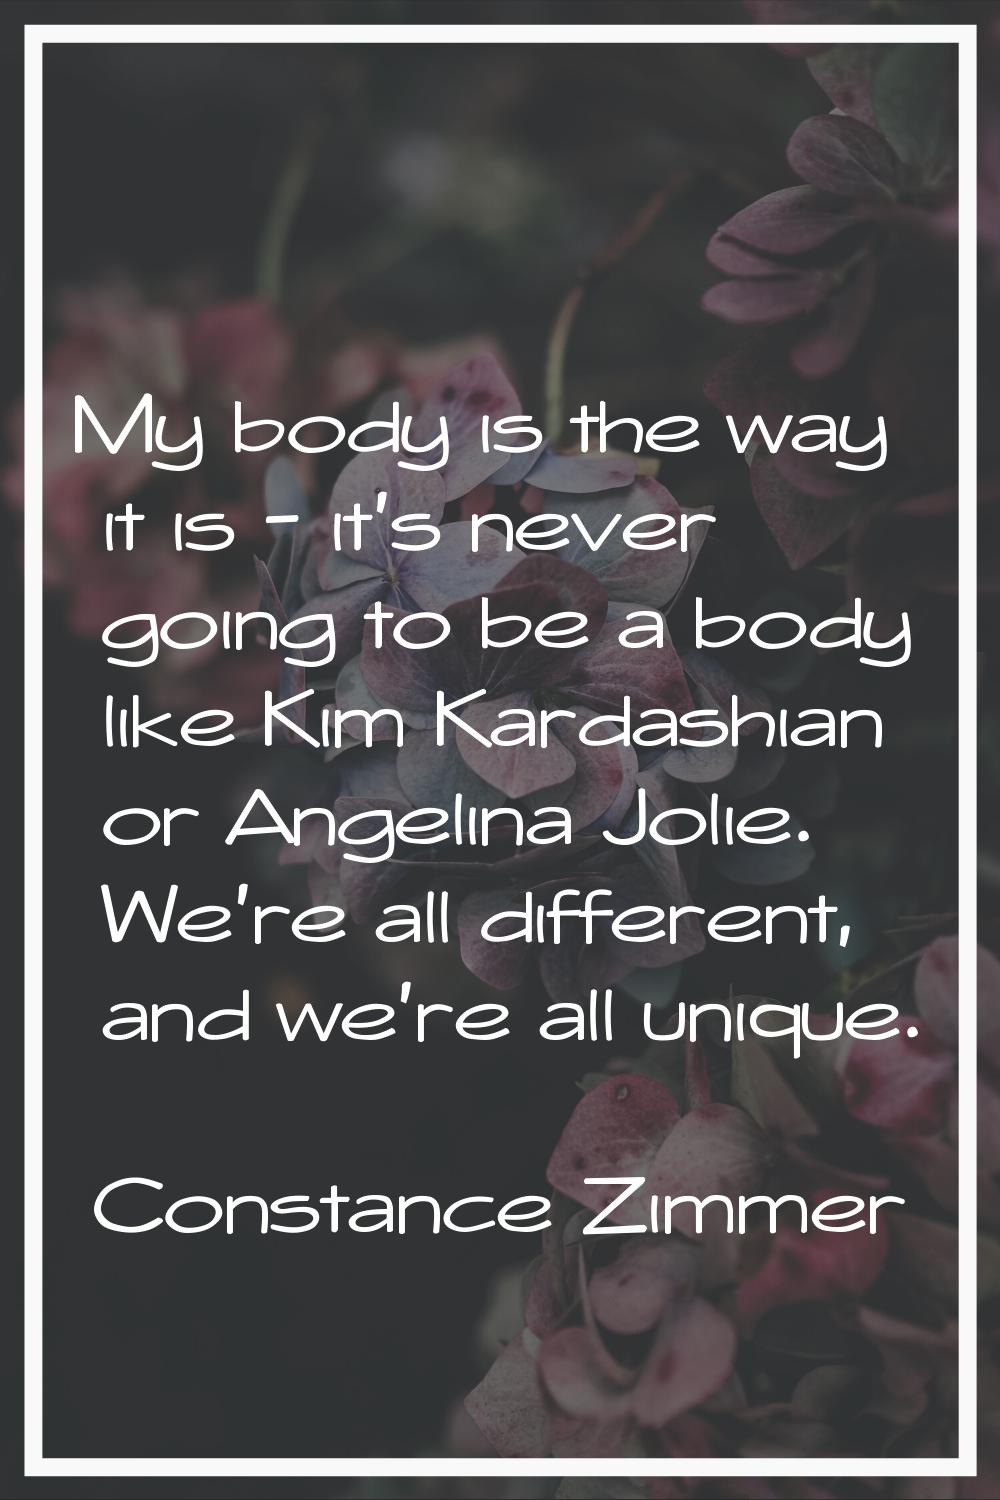 My body is the way it is - it's never going to be a body like Kim Kardashian or Angelina Jolie. We'